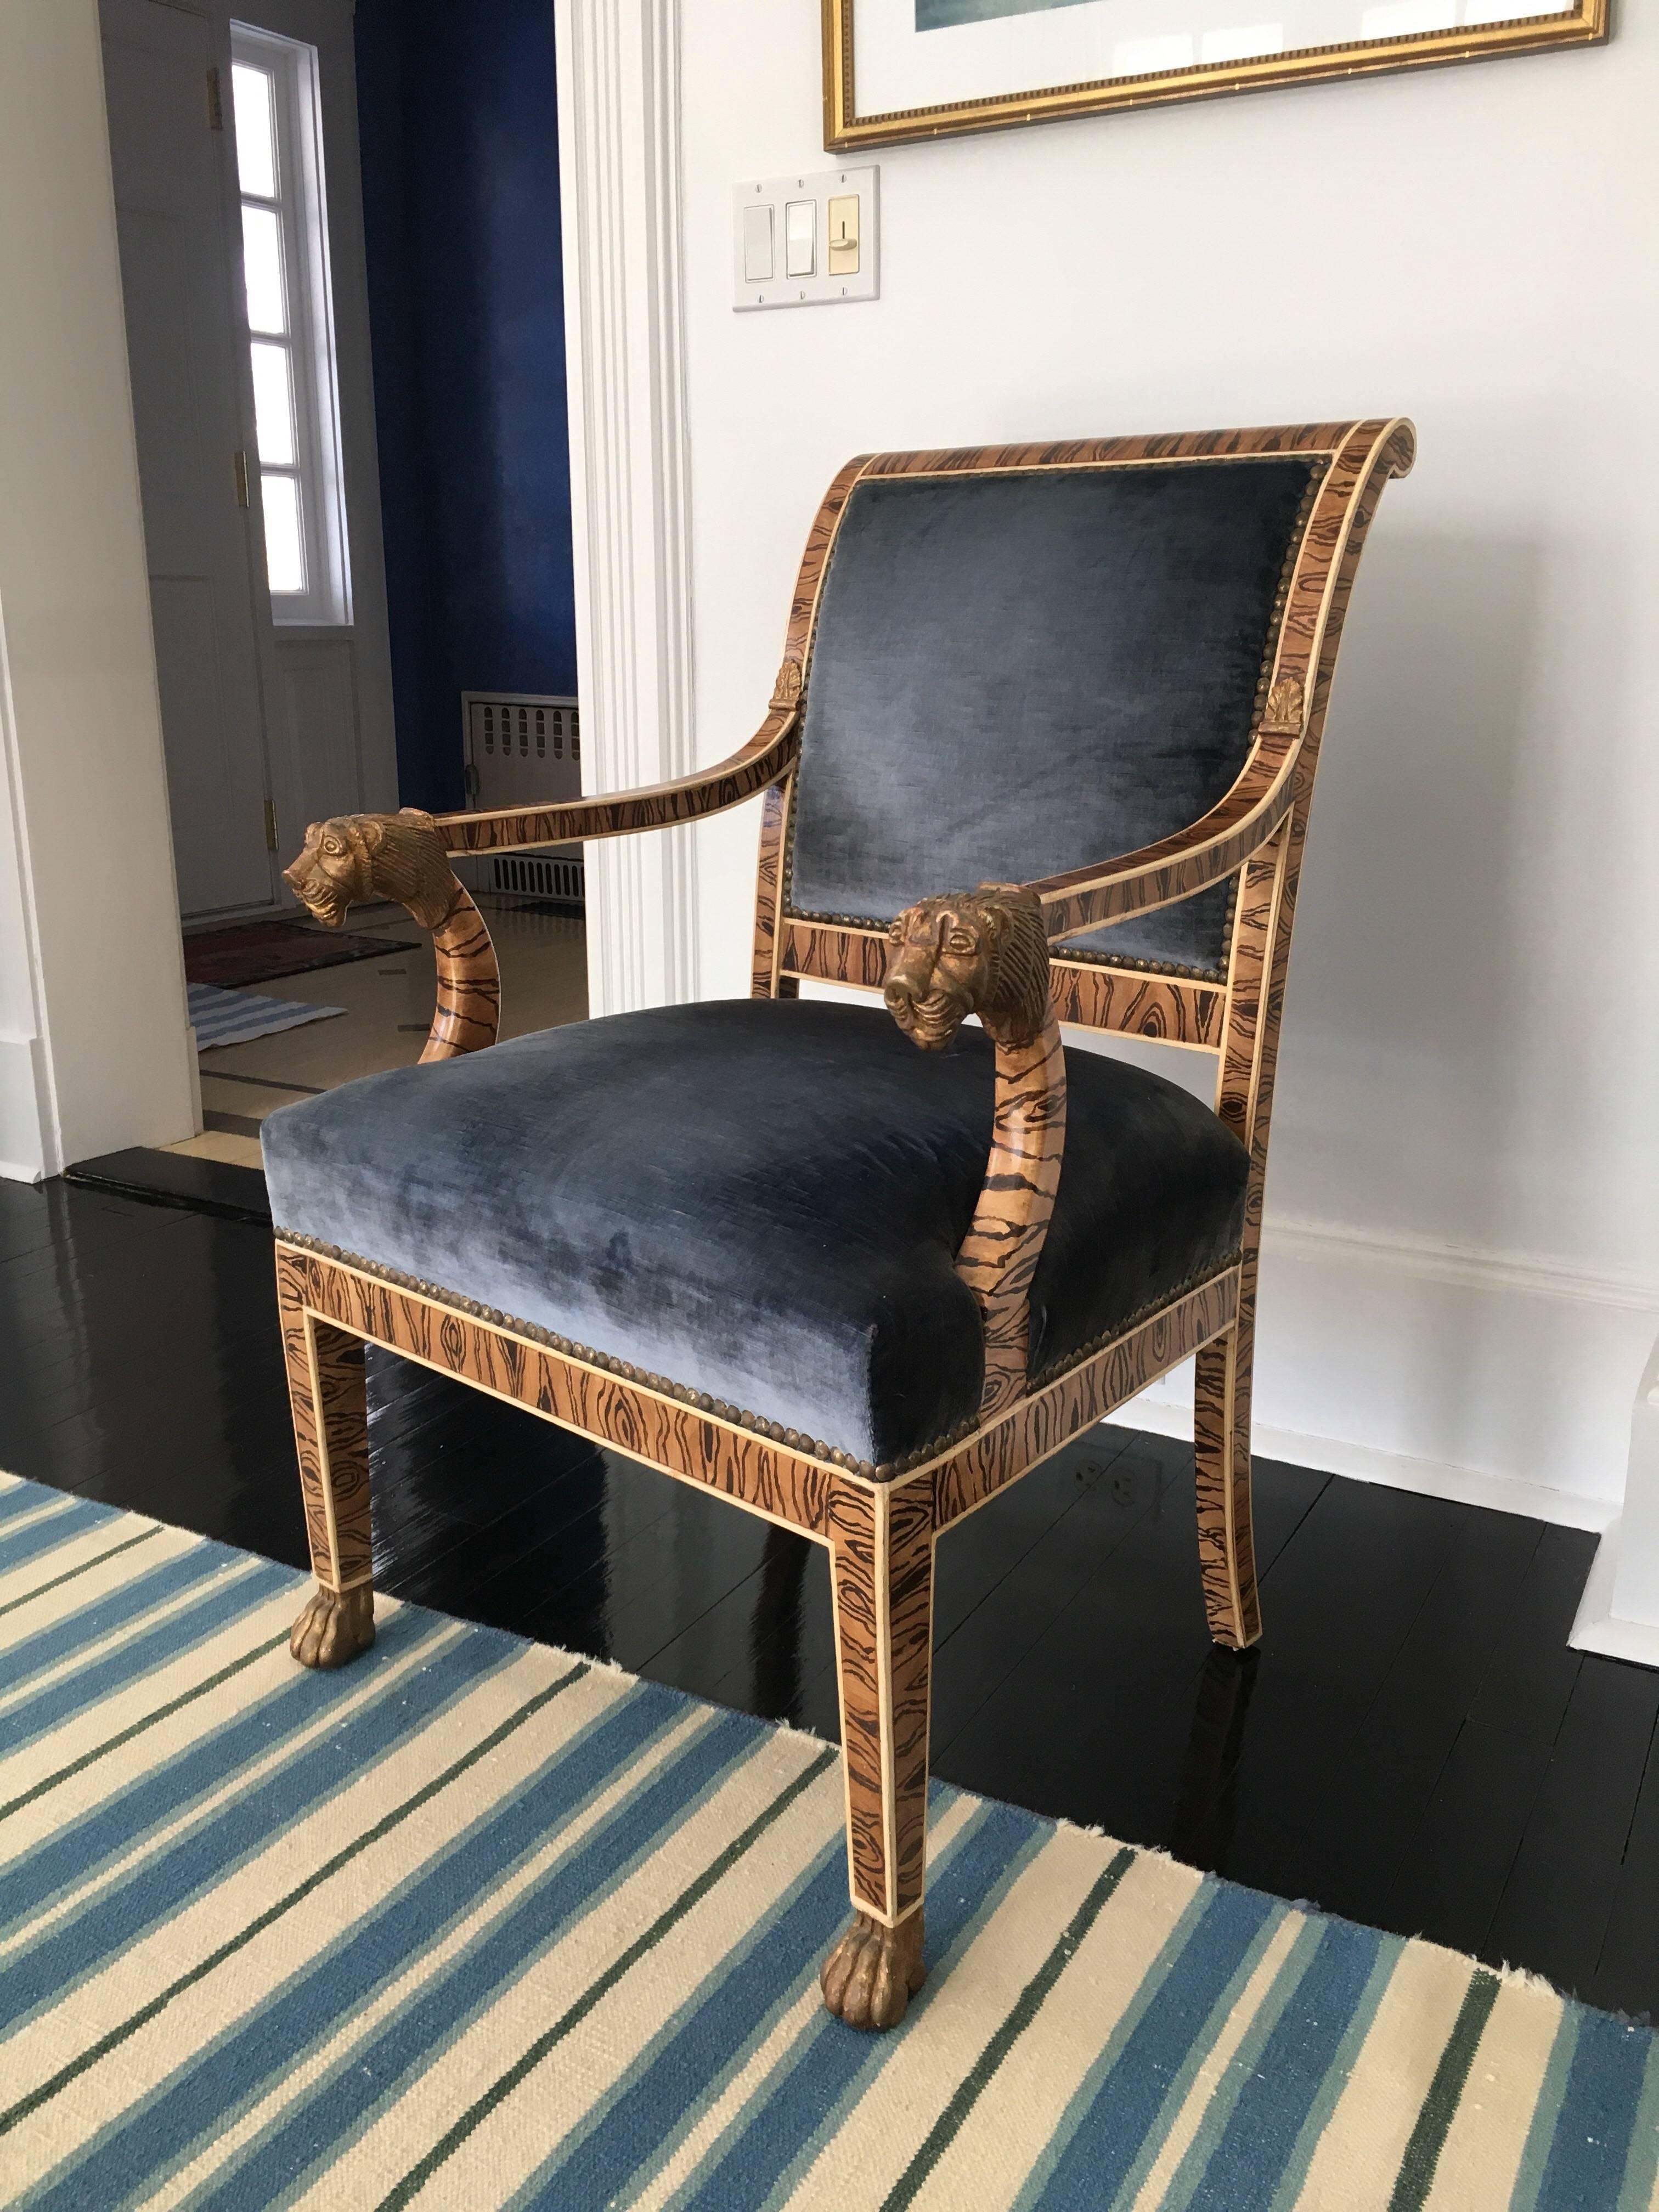 This French Empire Style Upholstered Faux Bois Armchair with Gilded Lion head and paw on arms and legs was custom made by, once top upholster in NYC, Delta Upholsterers. Upholstered in a slate blue silk velvet with brass nail heads around perimeter.